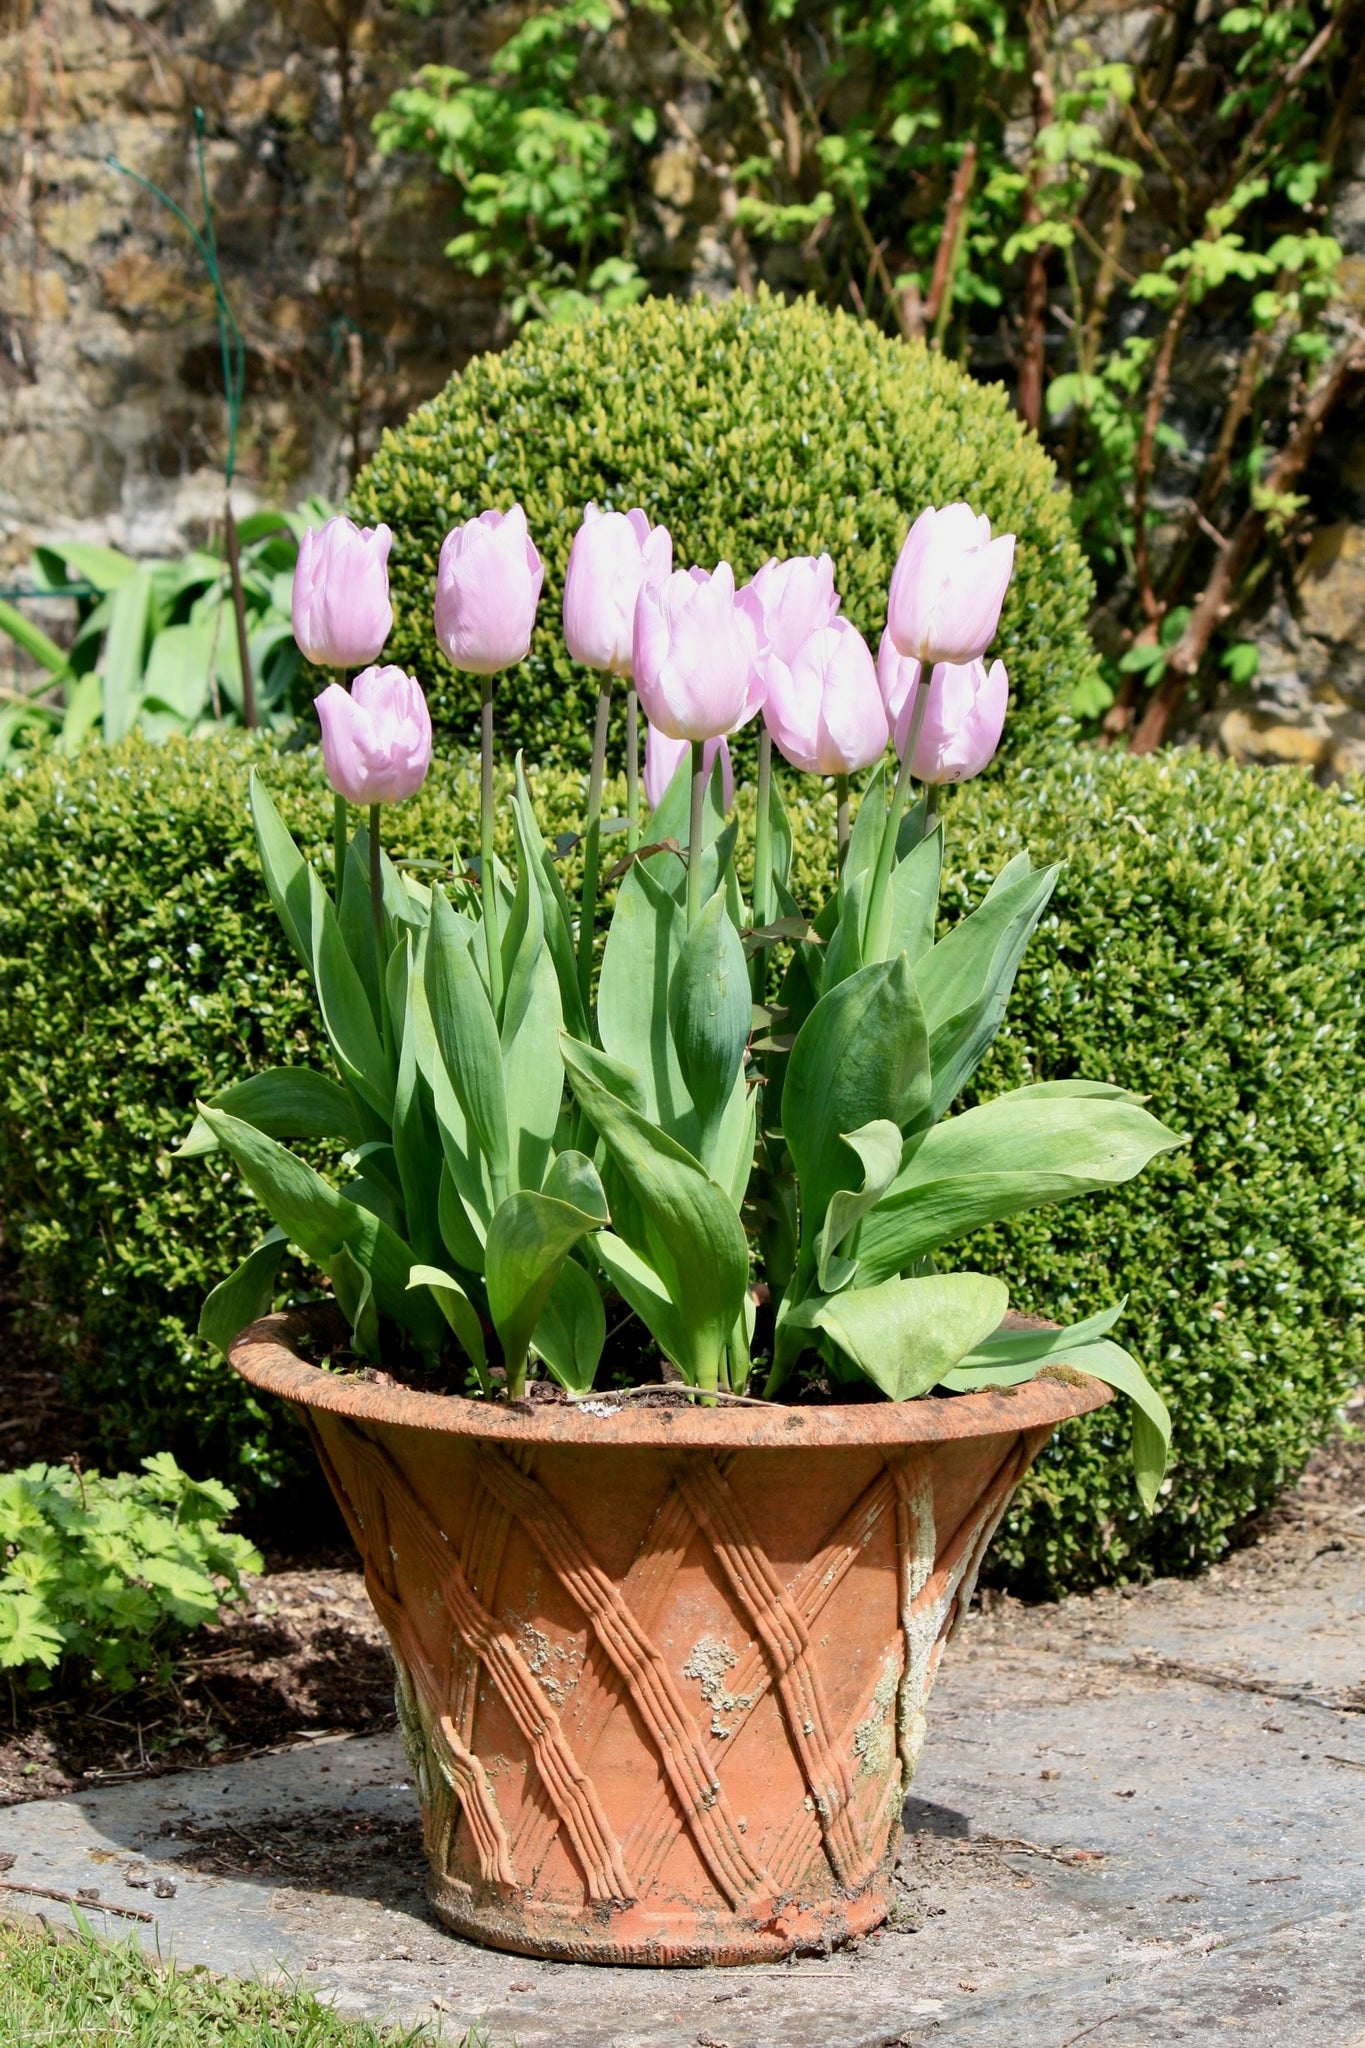 Tulips planted in an urn